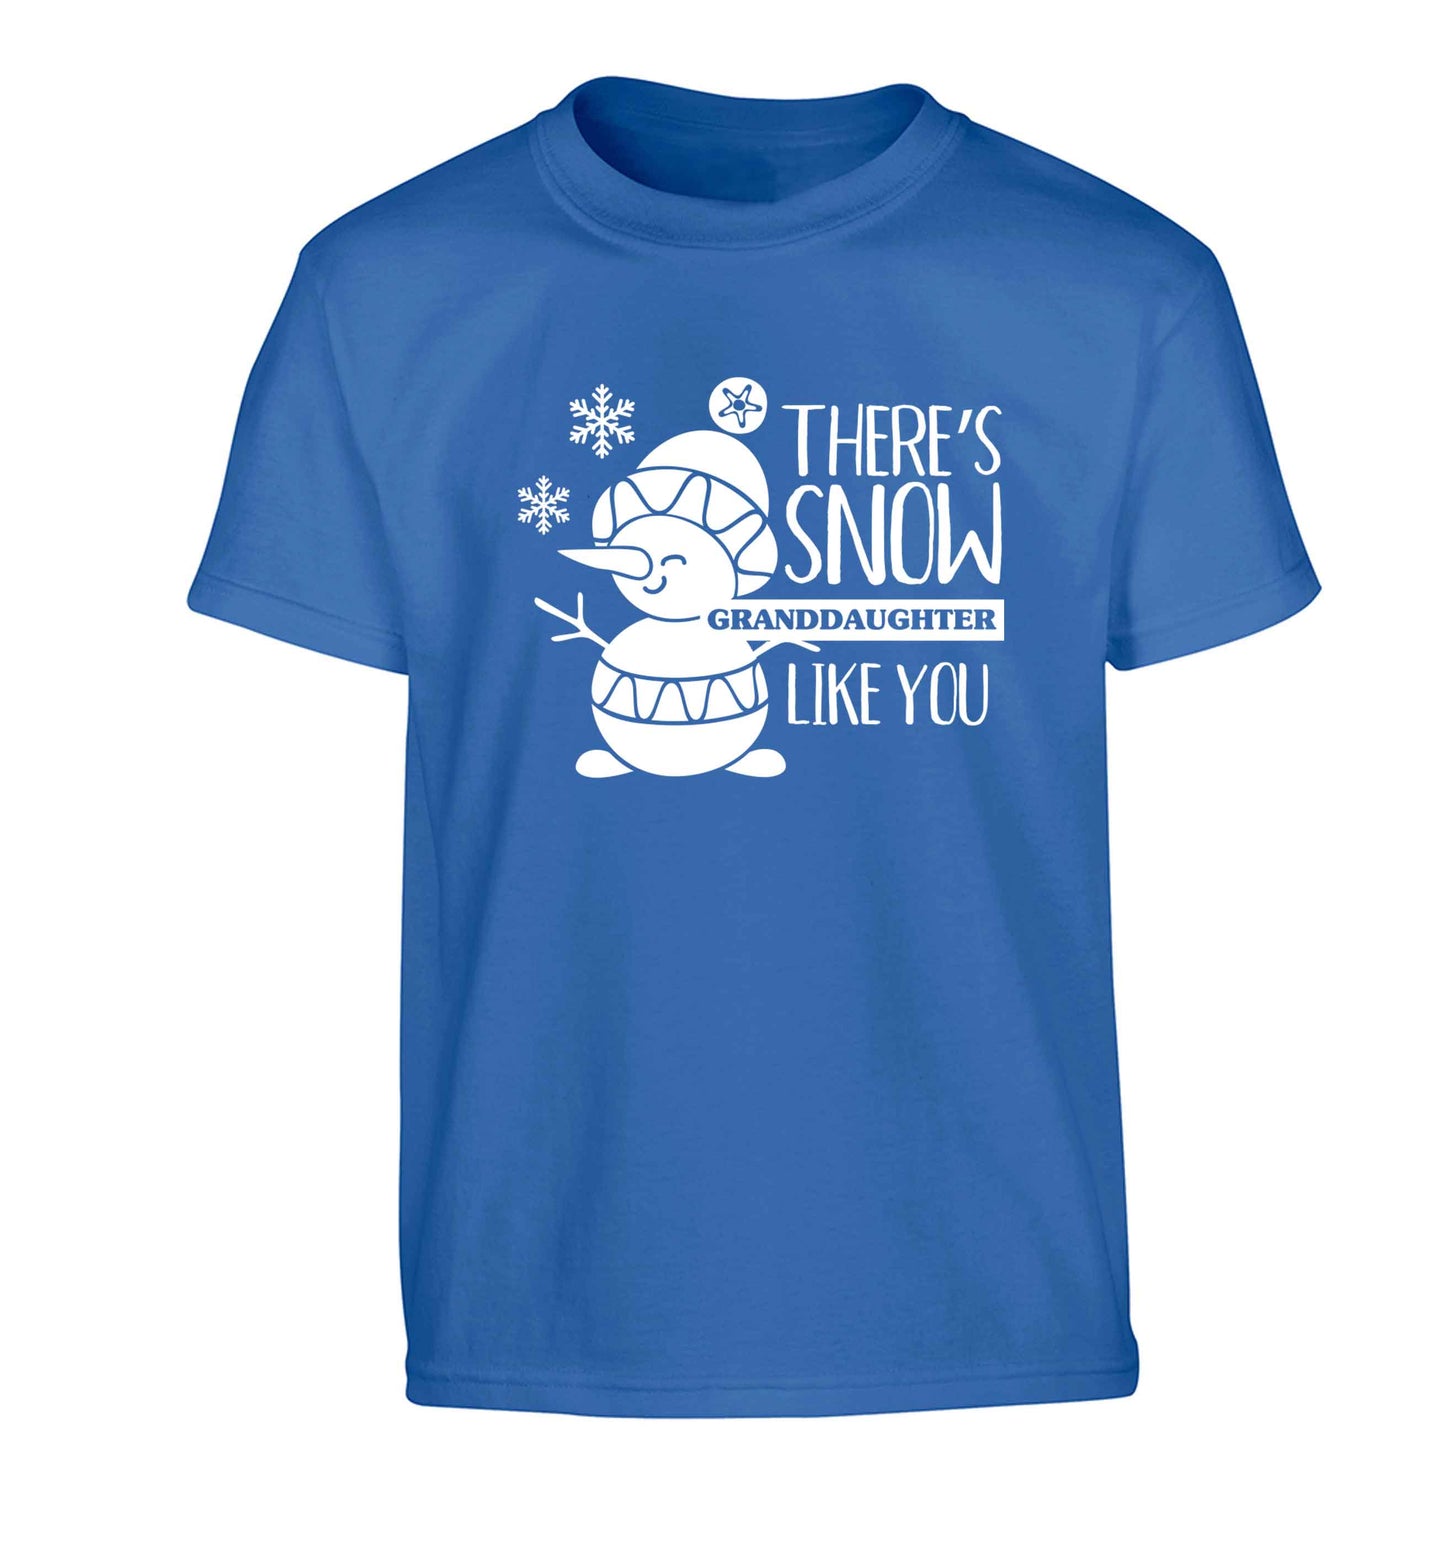 There's snow granddaughter like you Children's blue Tshirt 12-13 Years